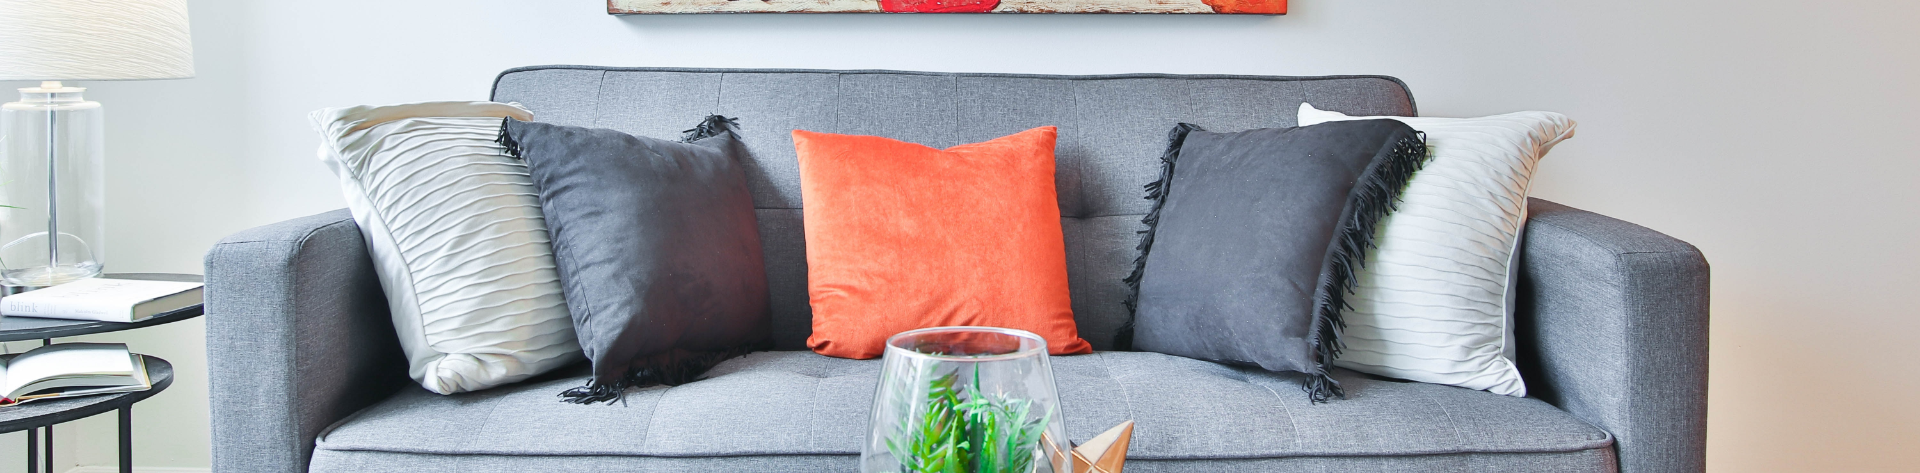 How to Swiftly Remove an Ink Stain from Your Sofa